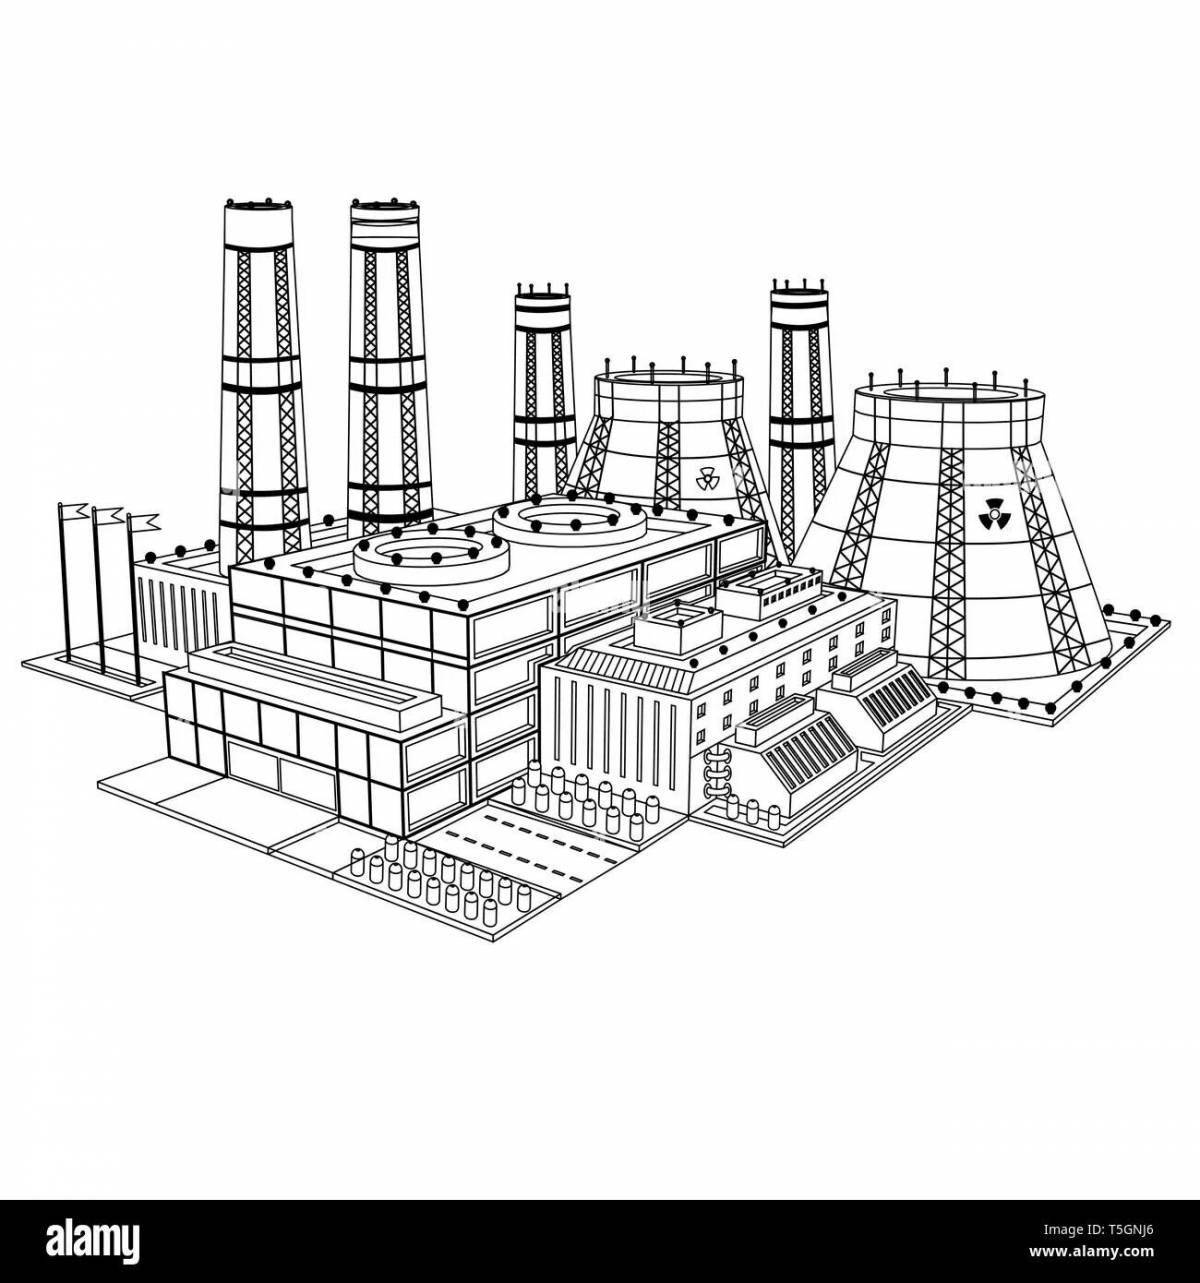 Amazing nuclear power coloring book